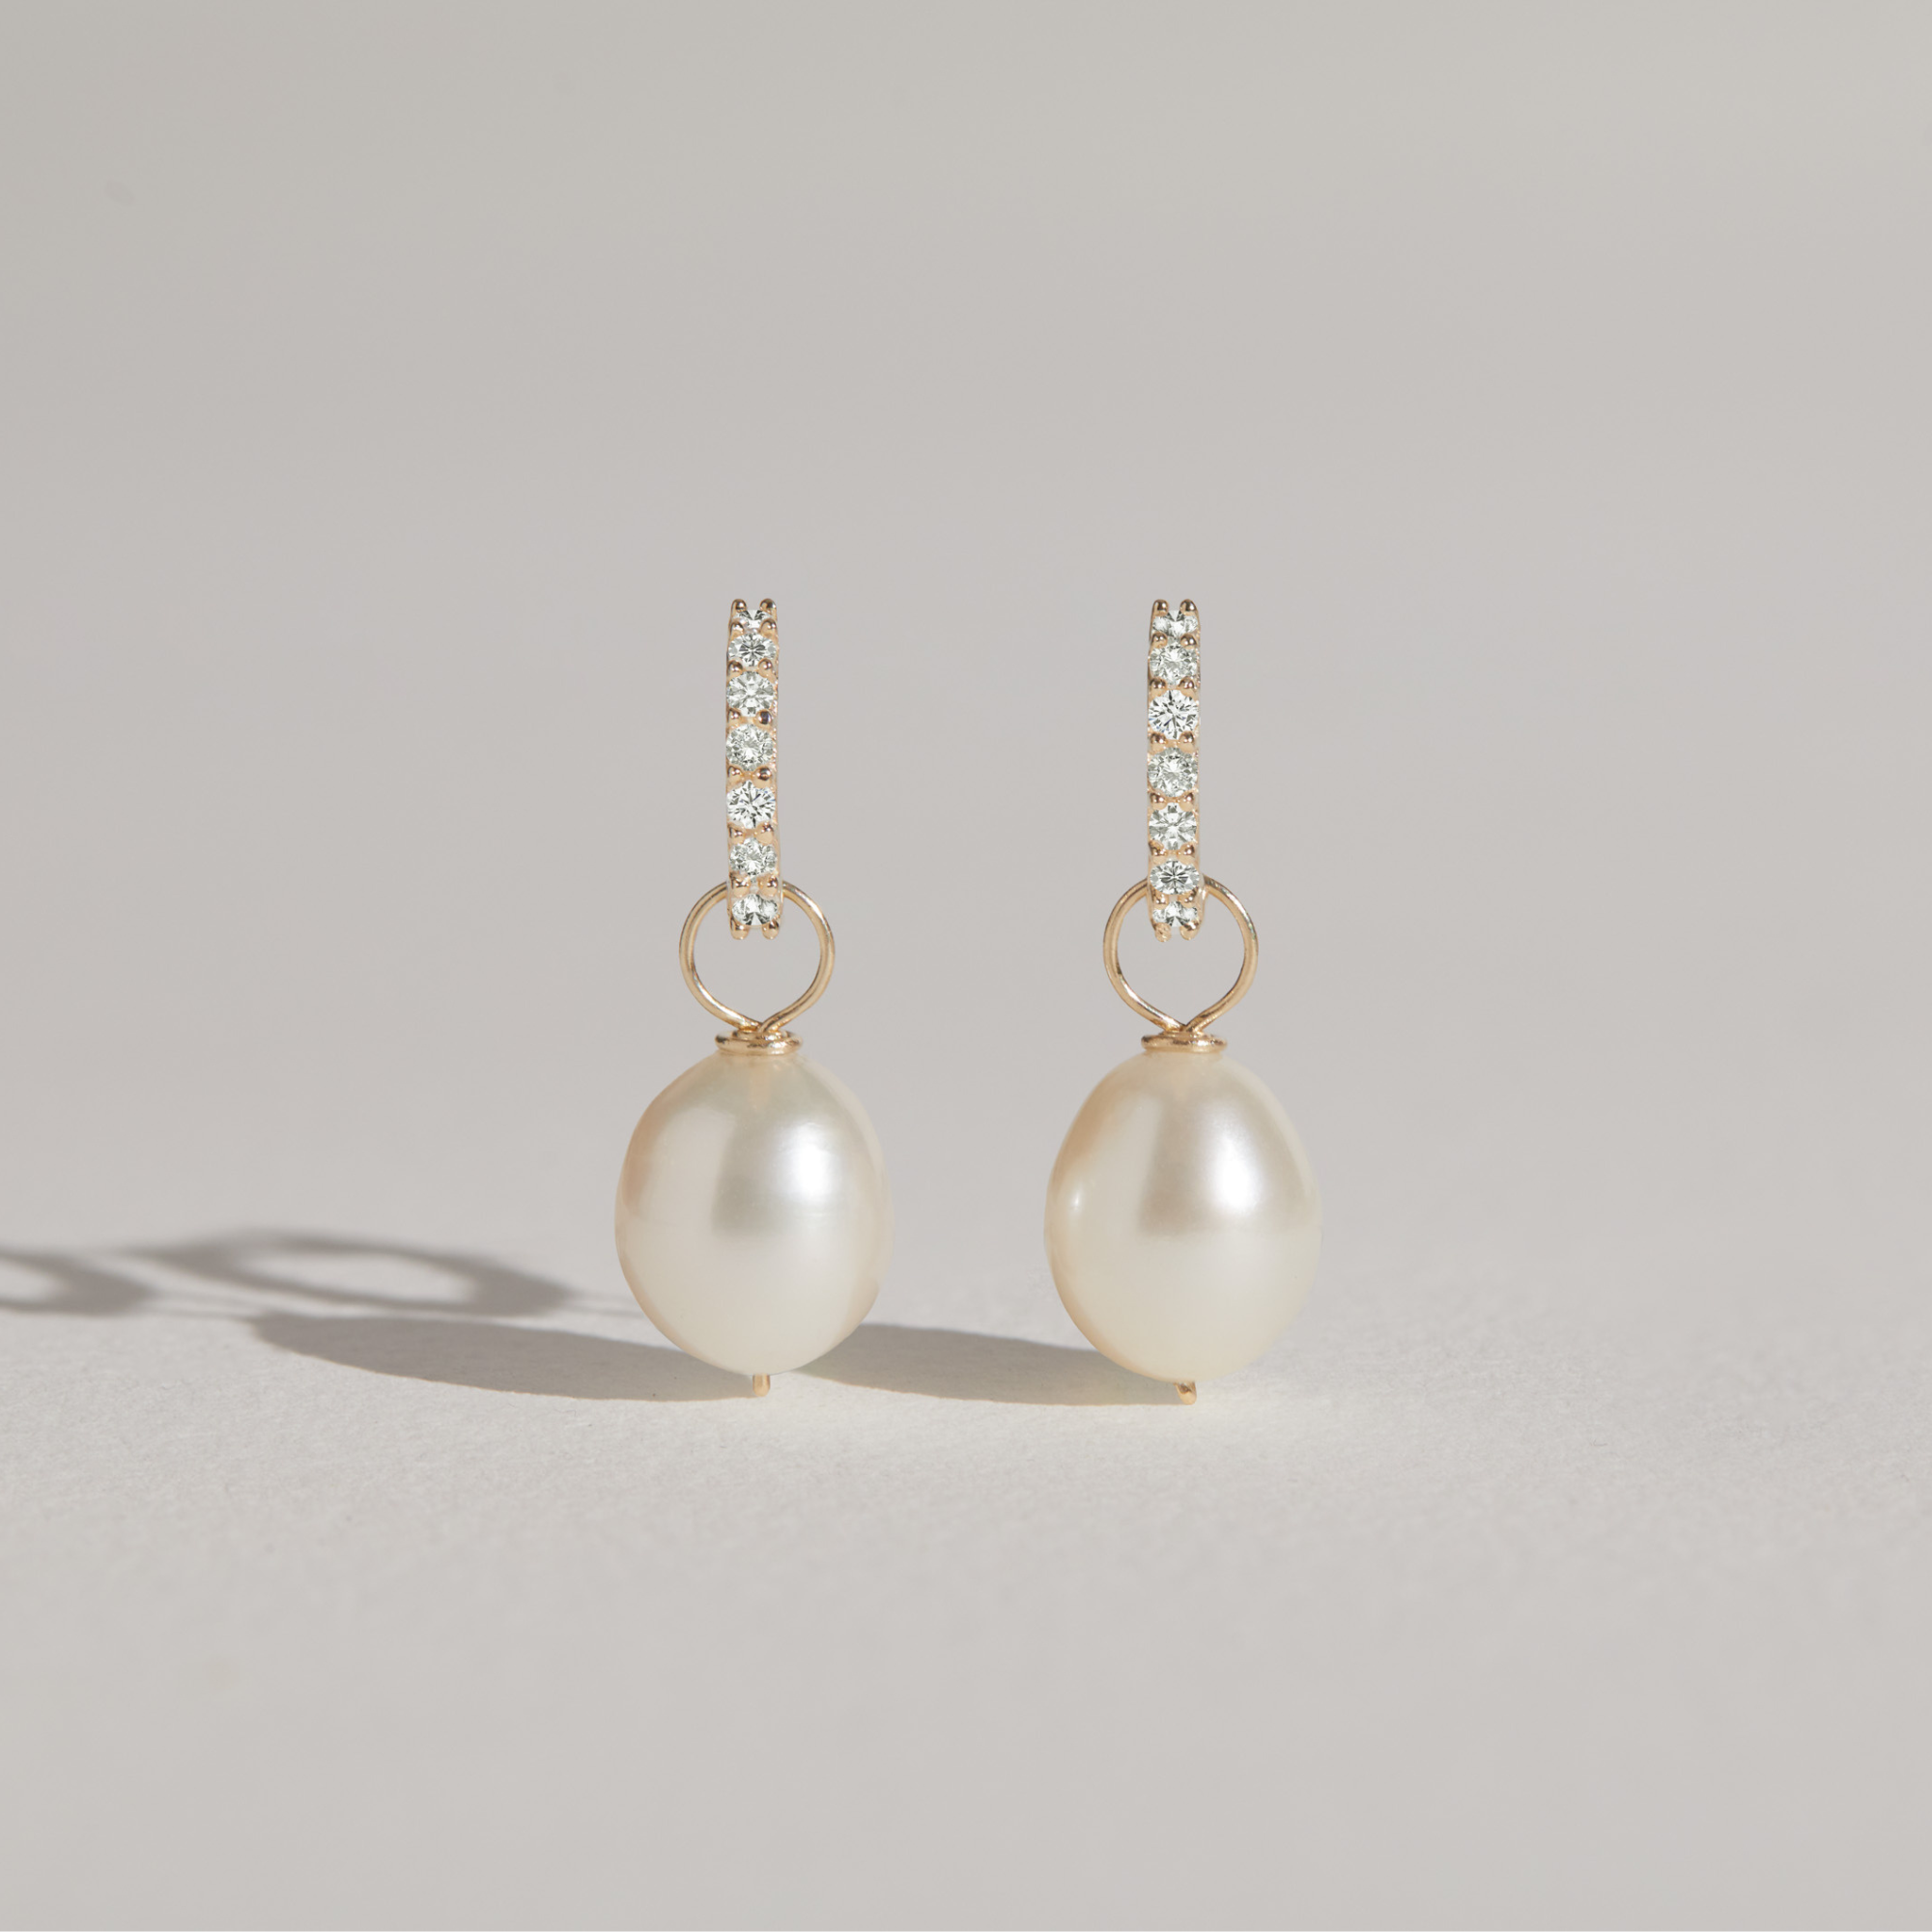 Gold huggie pearl drop earrings on a grey background with shadows